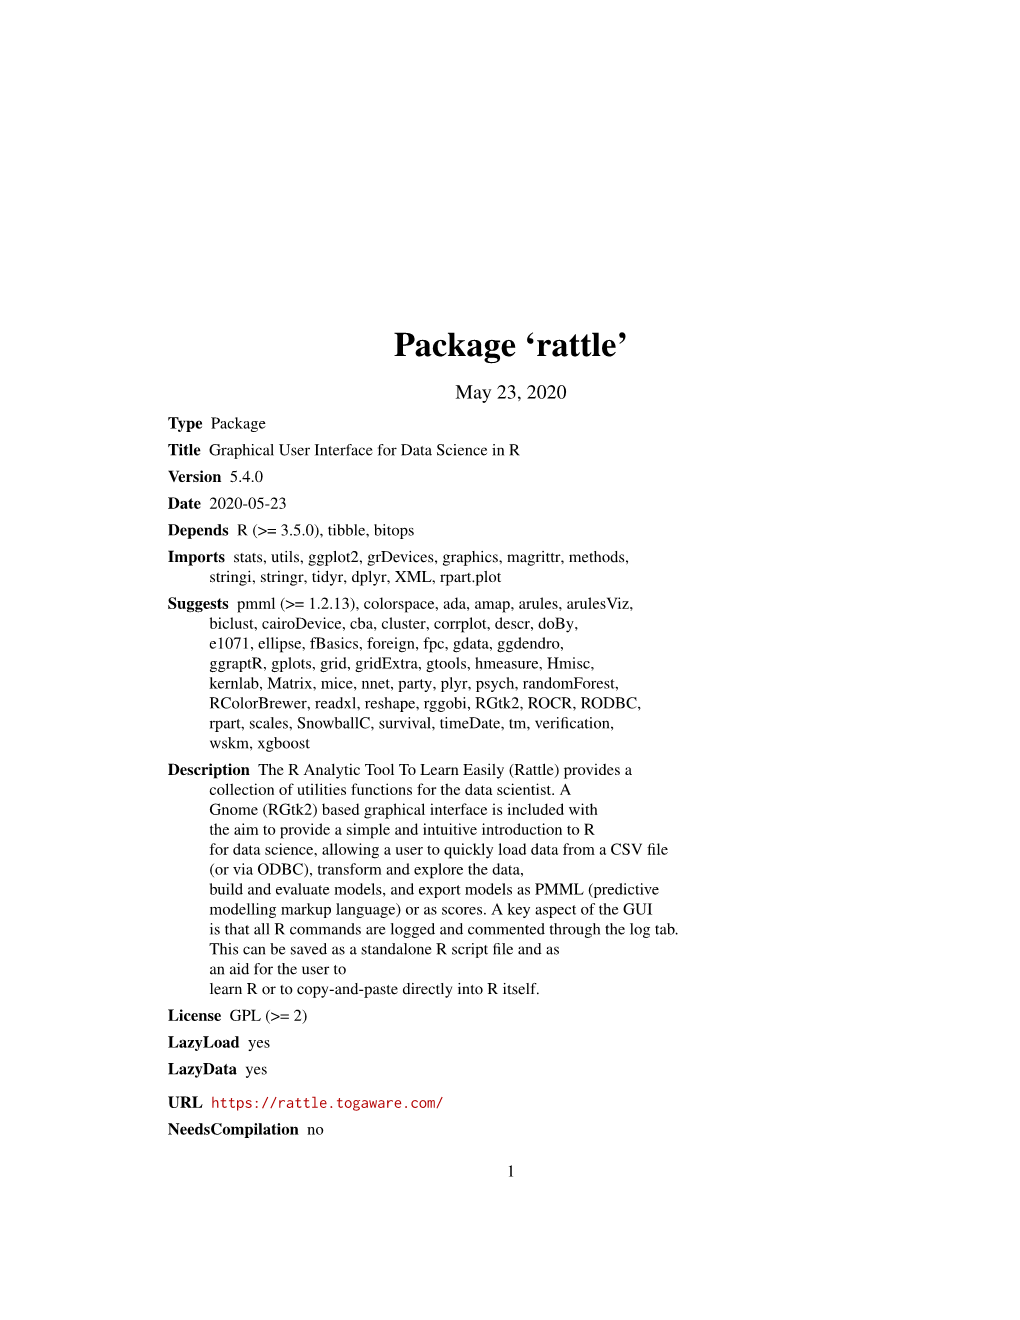 Package 'Rattle'